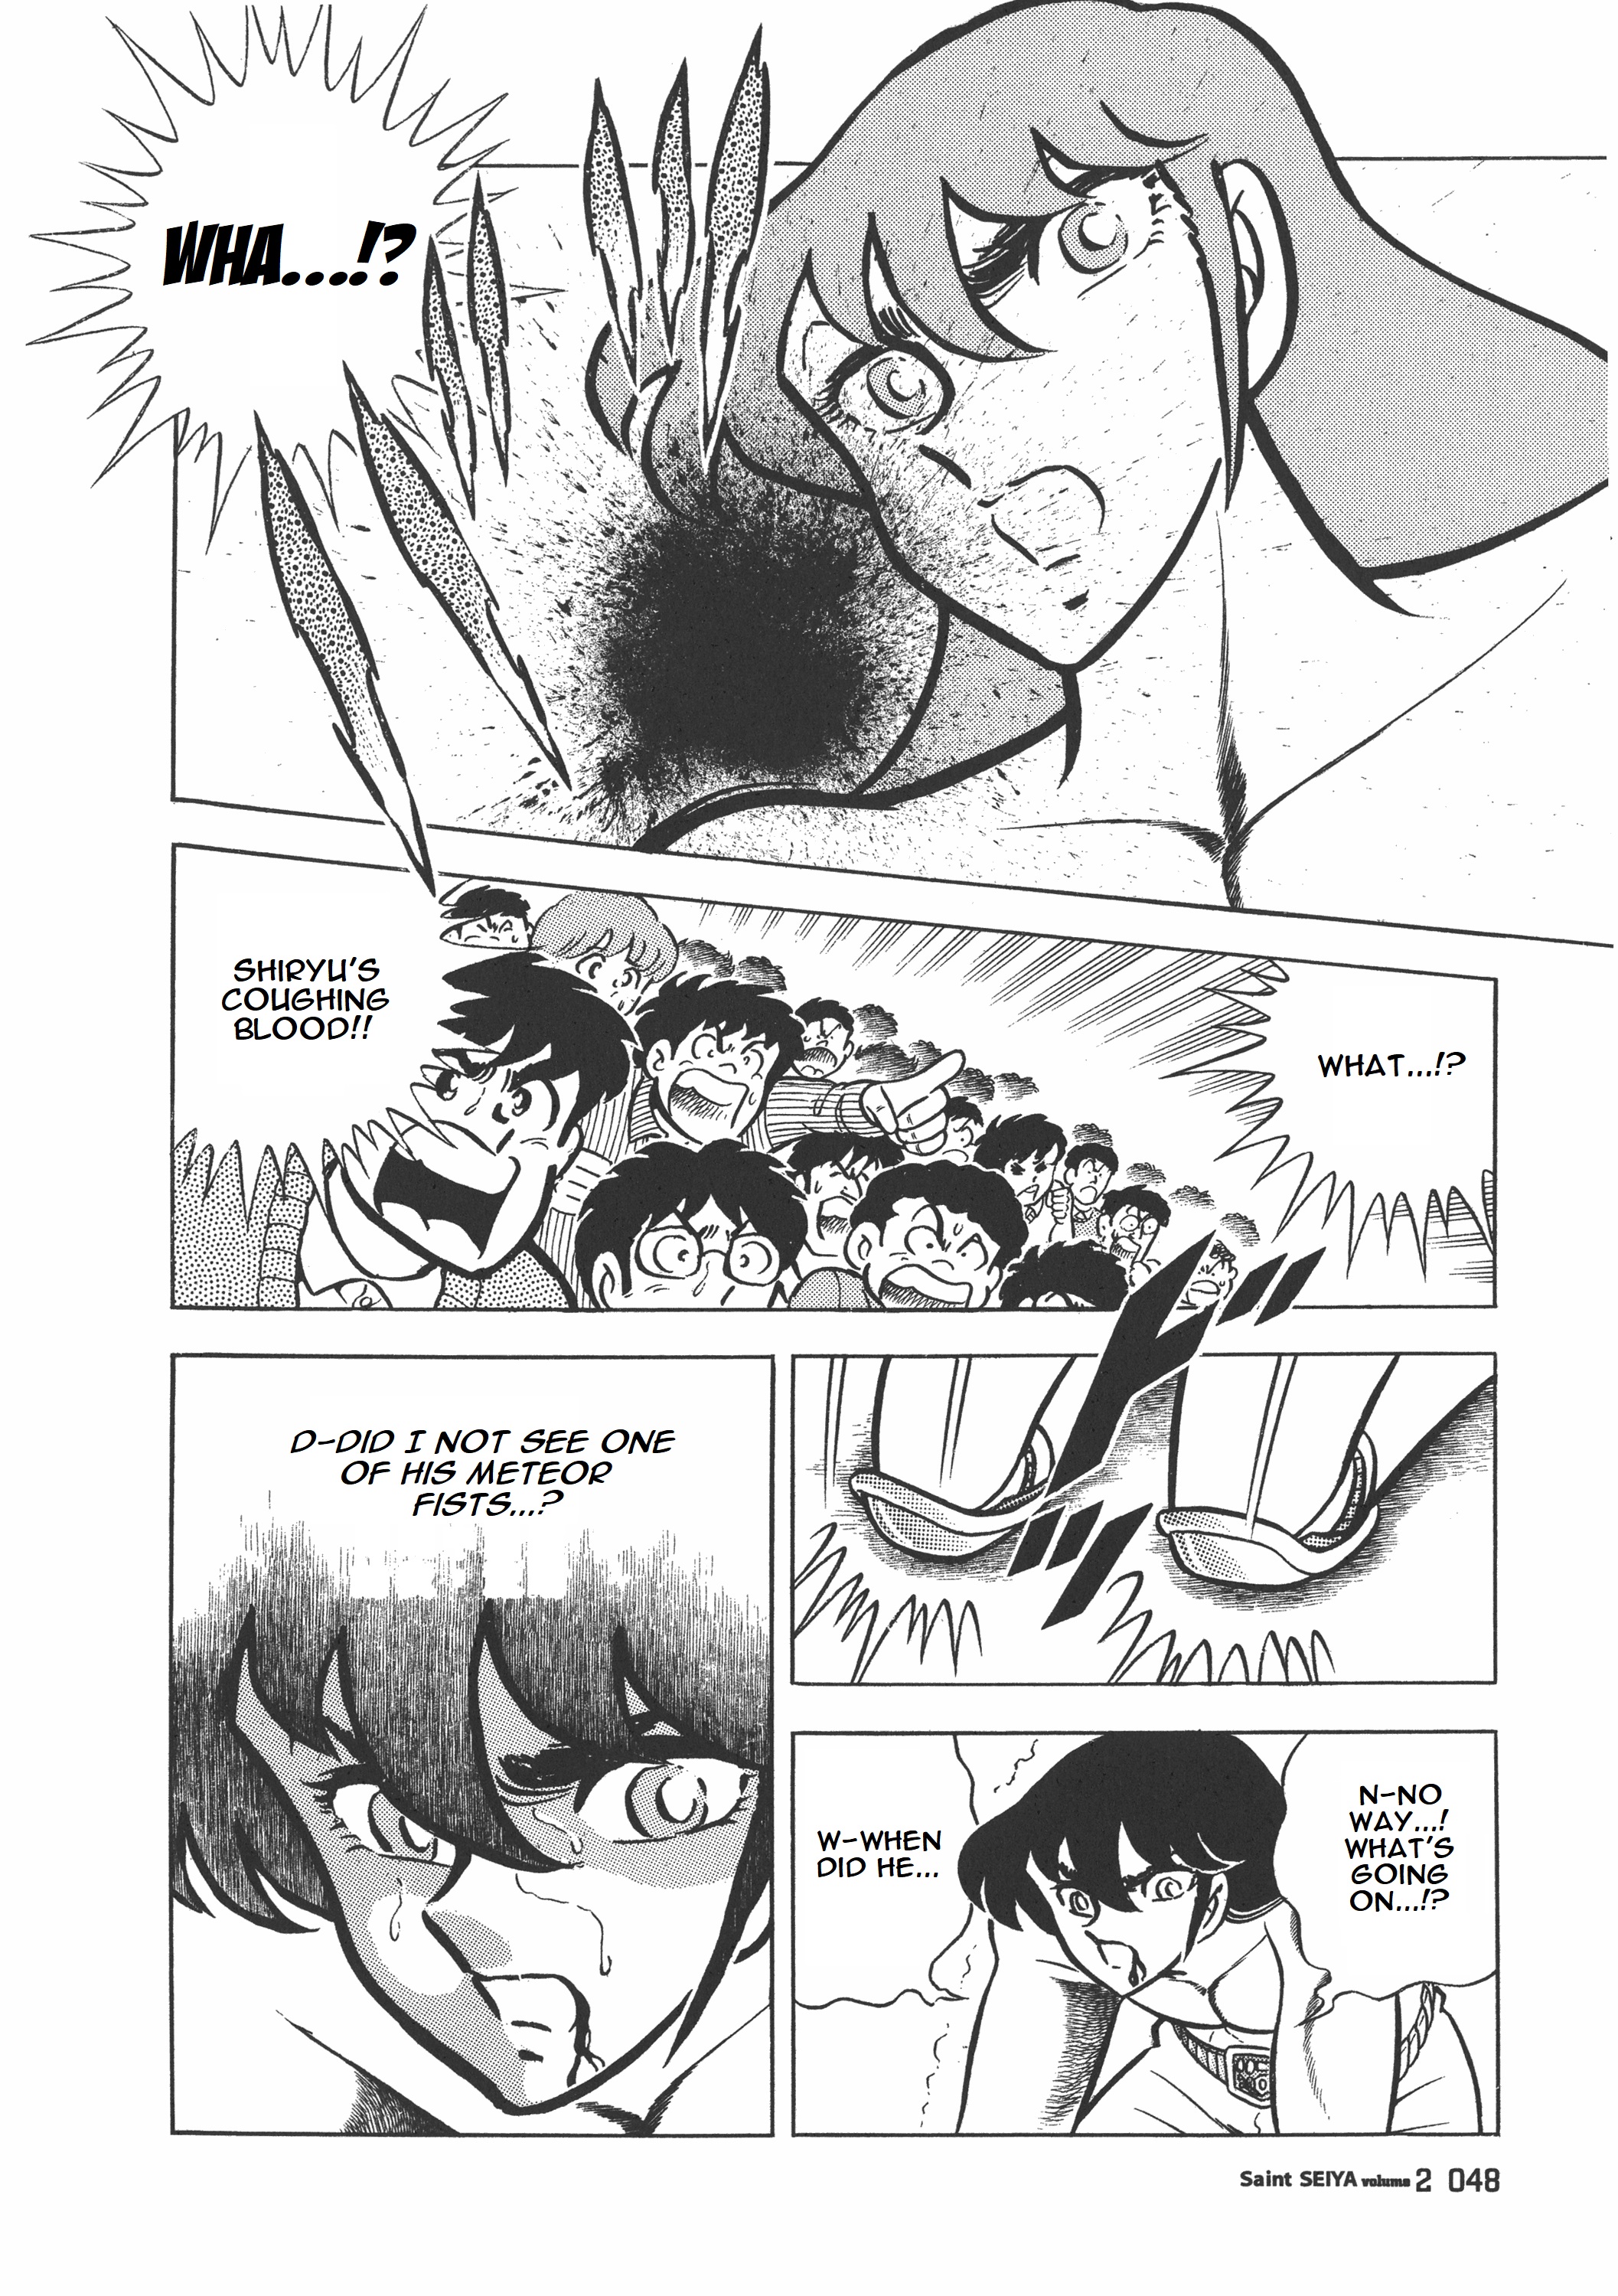 Saint Seiya (Kanzenban Edition) Vol.2 Chapter 7.2: Fight To The Death! Pegasus Vs. Dragon (Part Two) - Picture 2